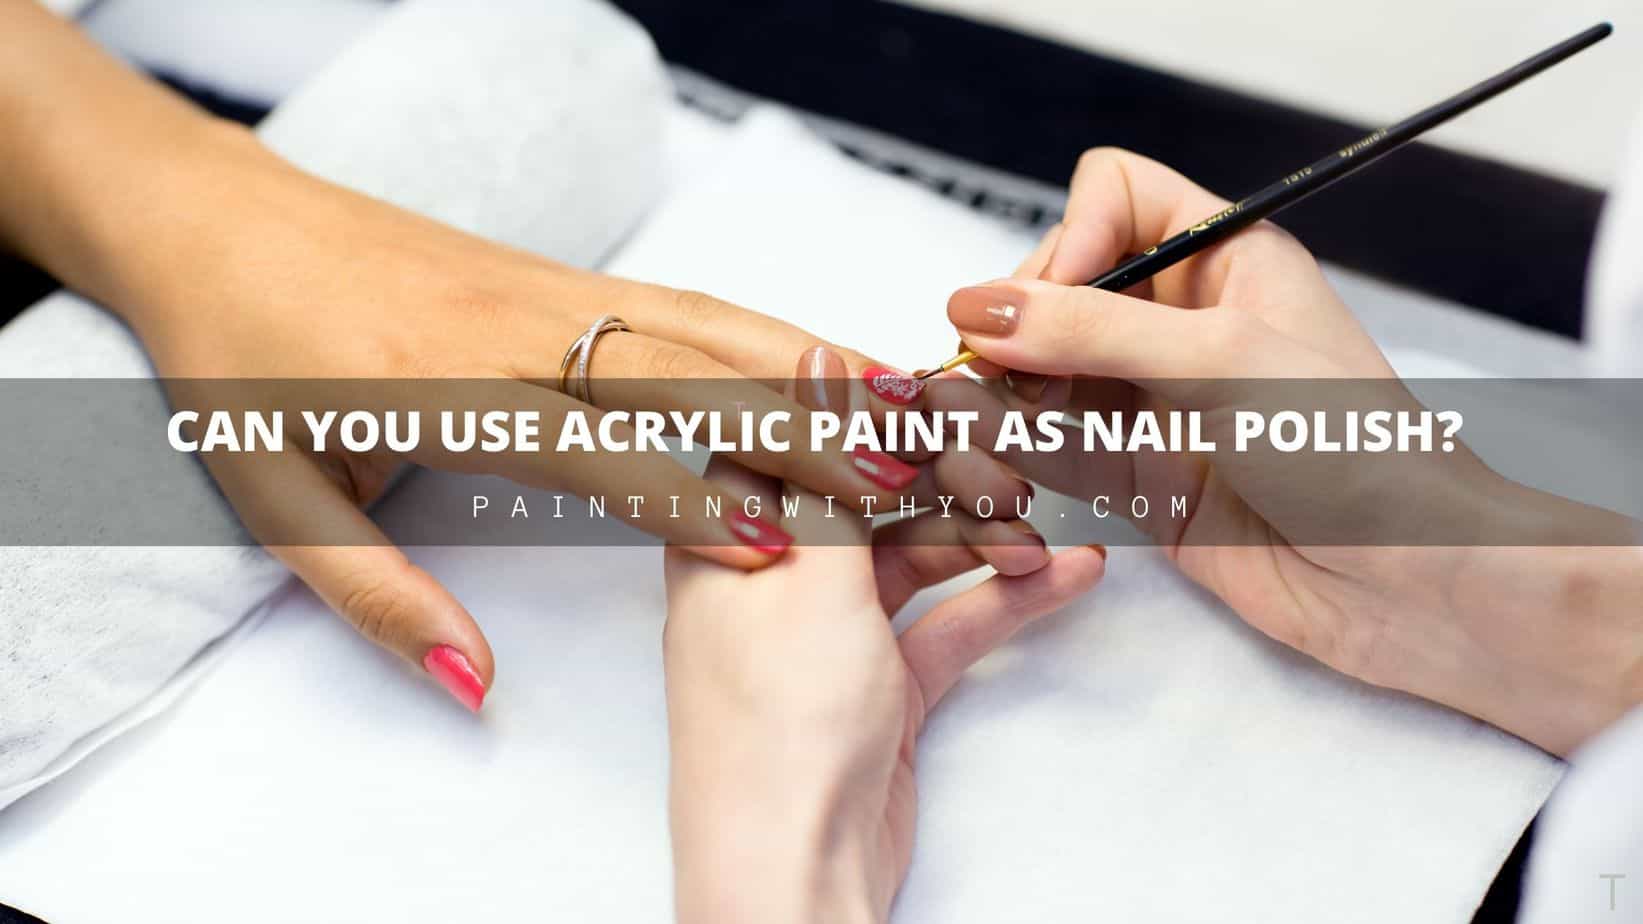 Can You Use Acrylic Paint As Nail Polish Painting With You